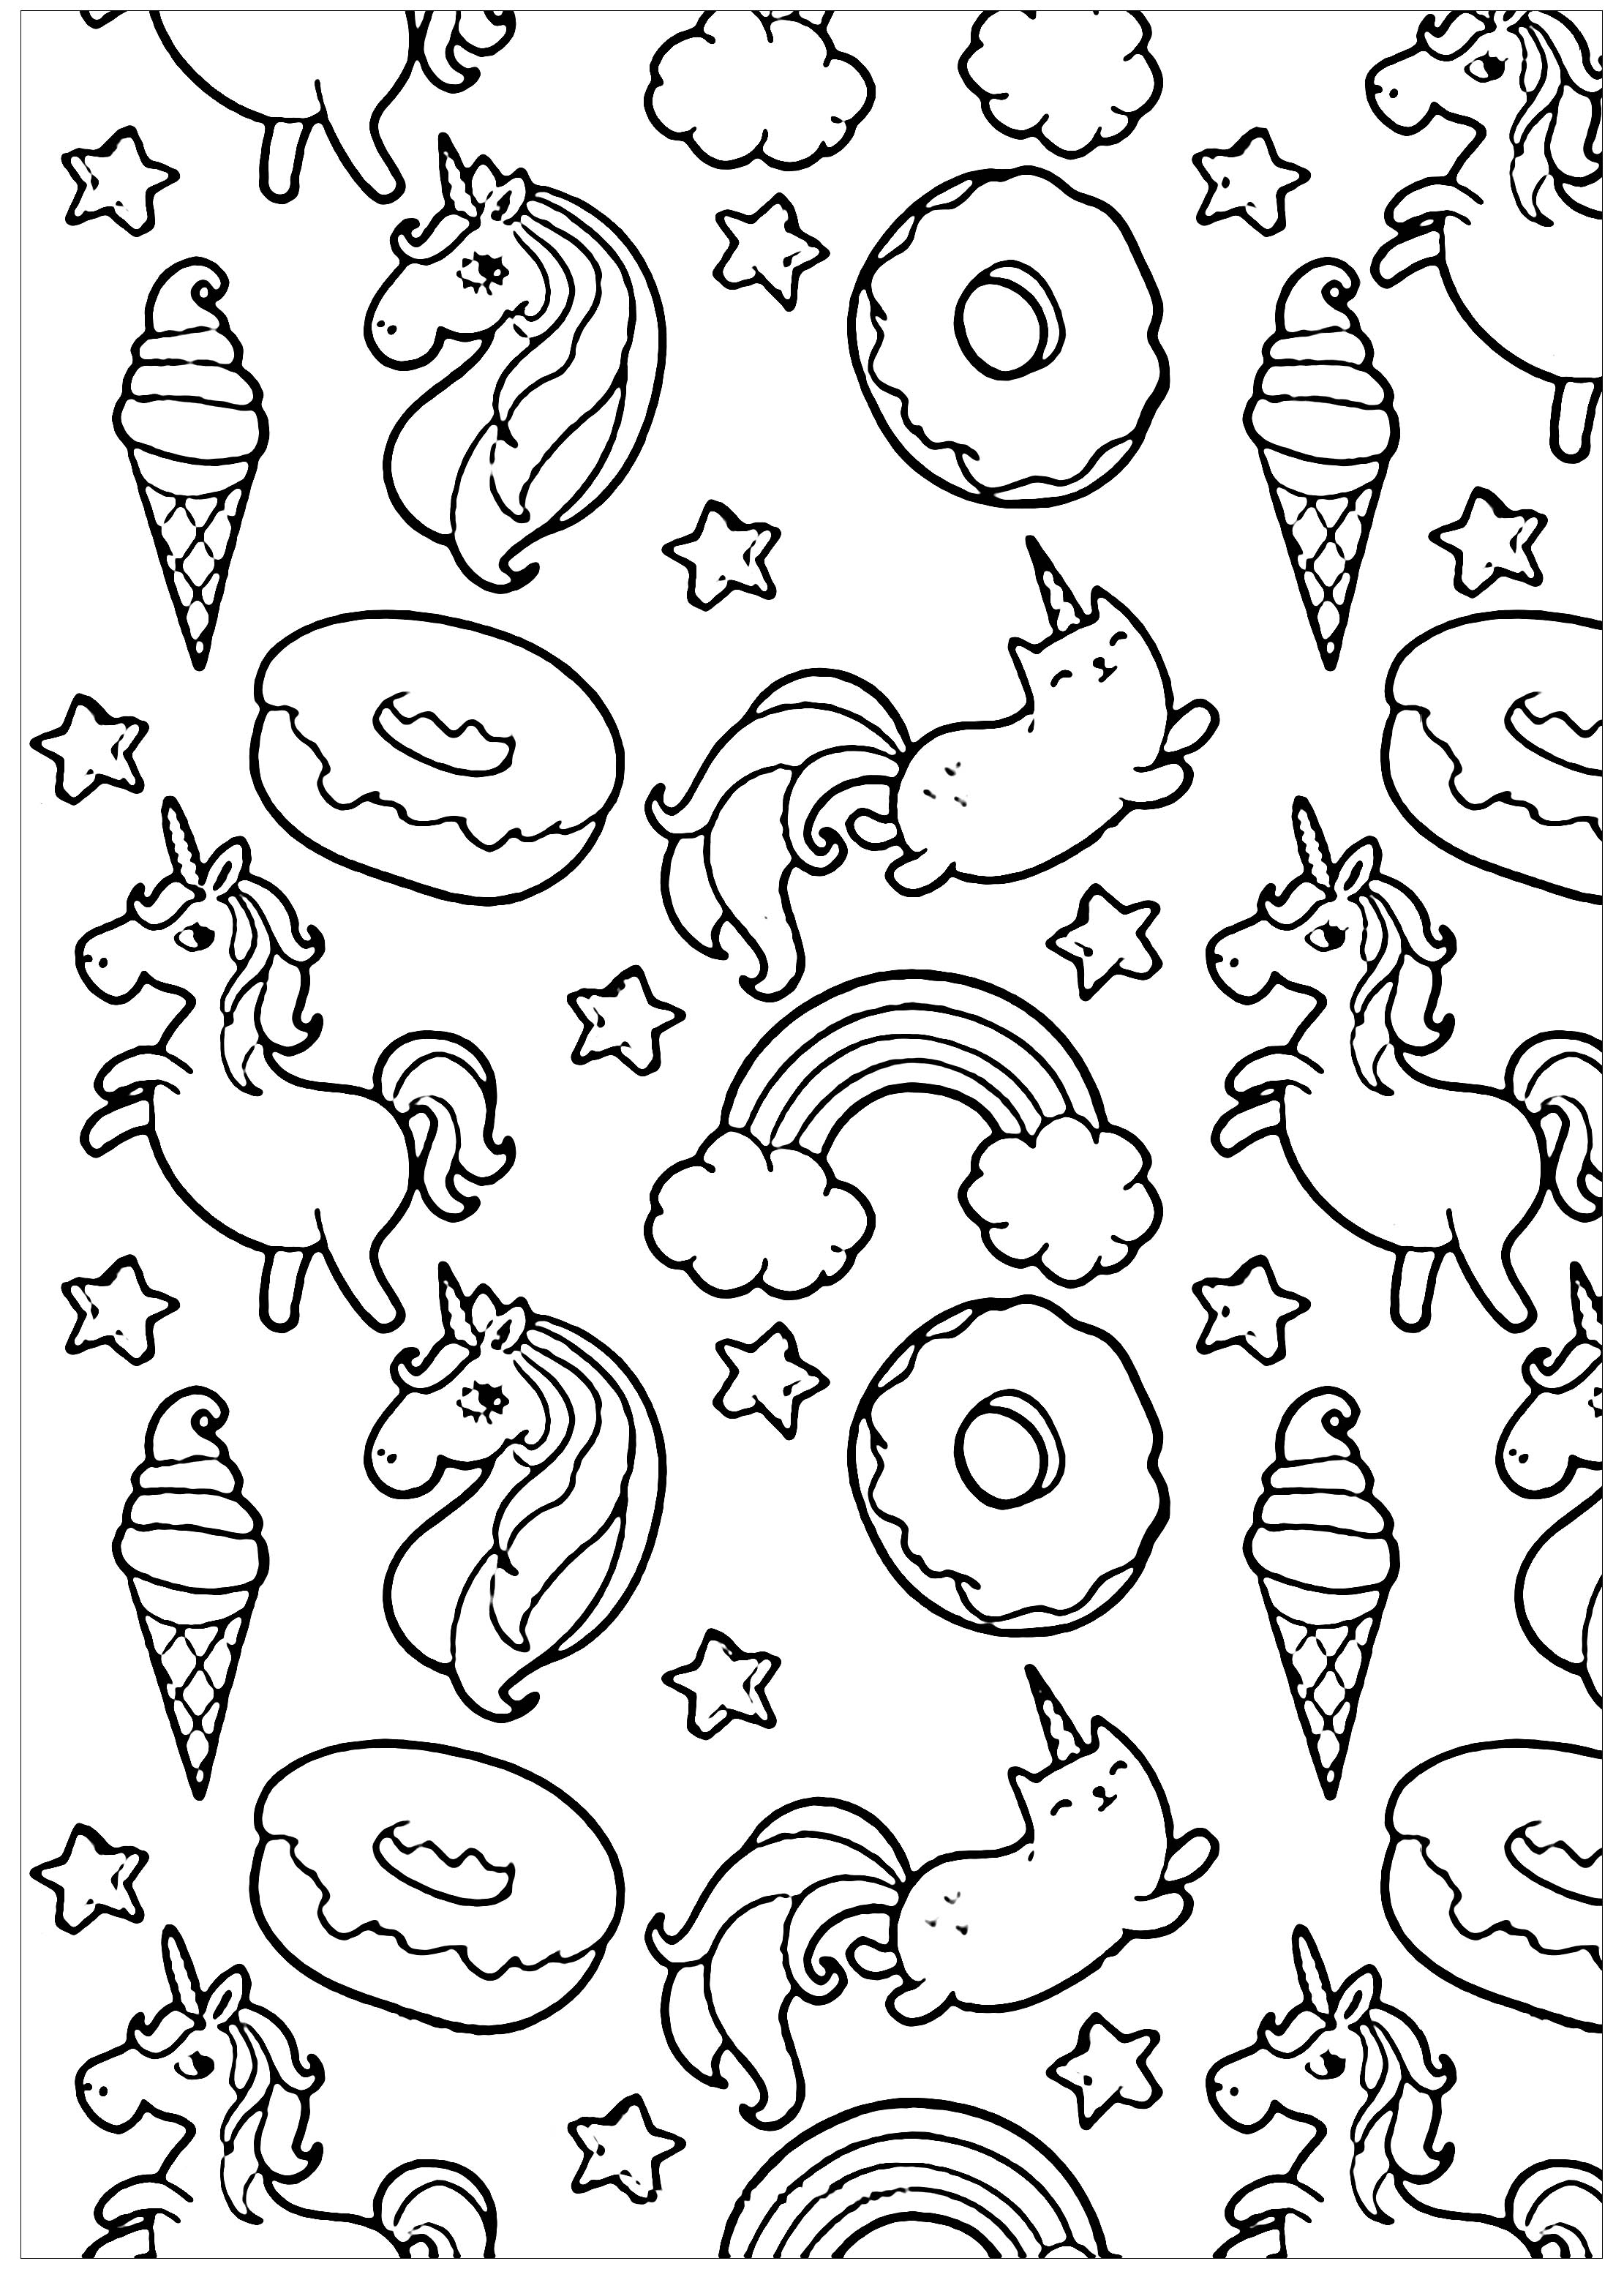 Pusheen donuts and unicorn - Doodle Art / Doodling Adult Coloring Pages